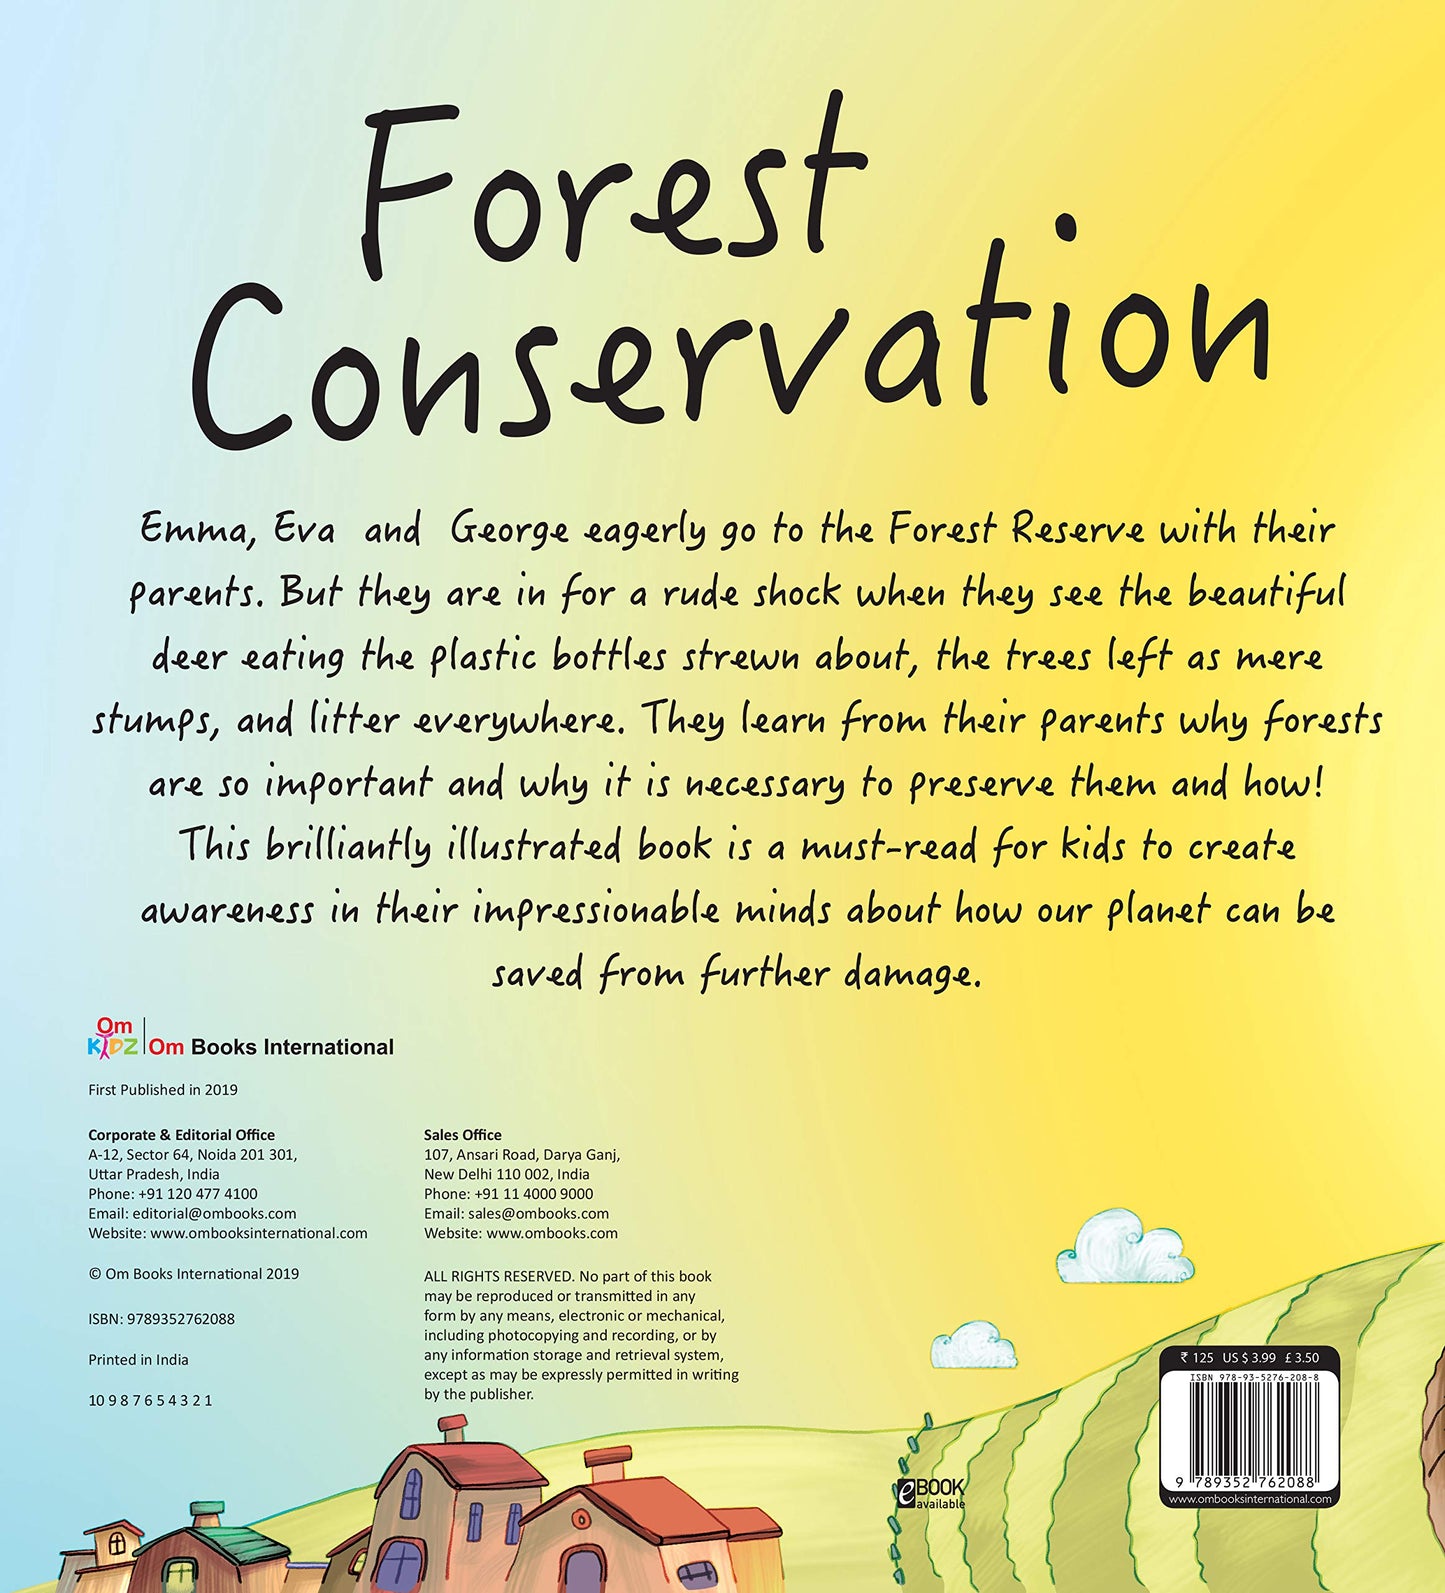 Go Green-forest conservation